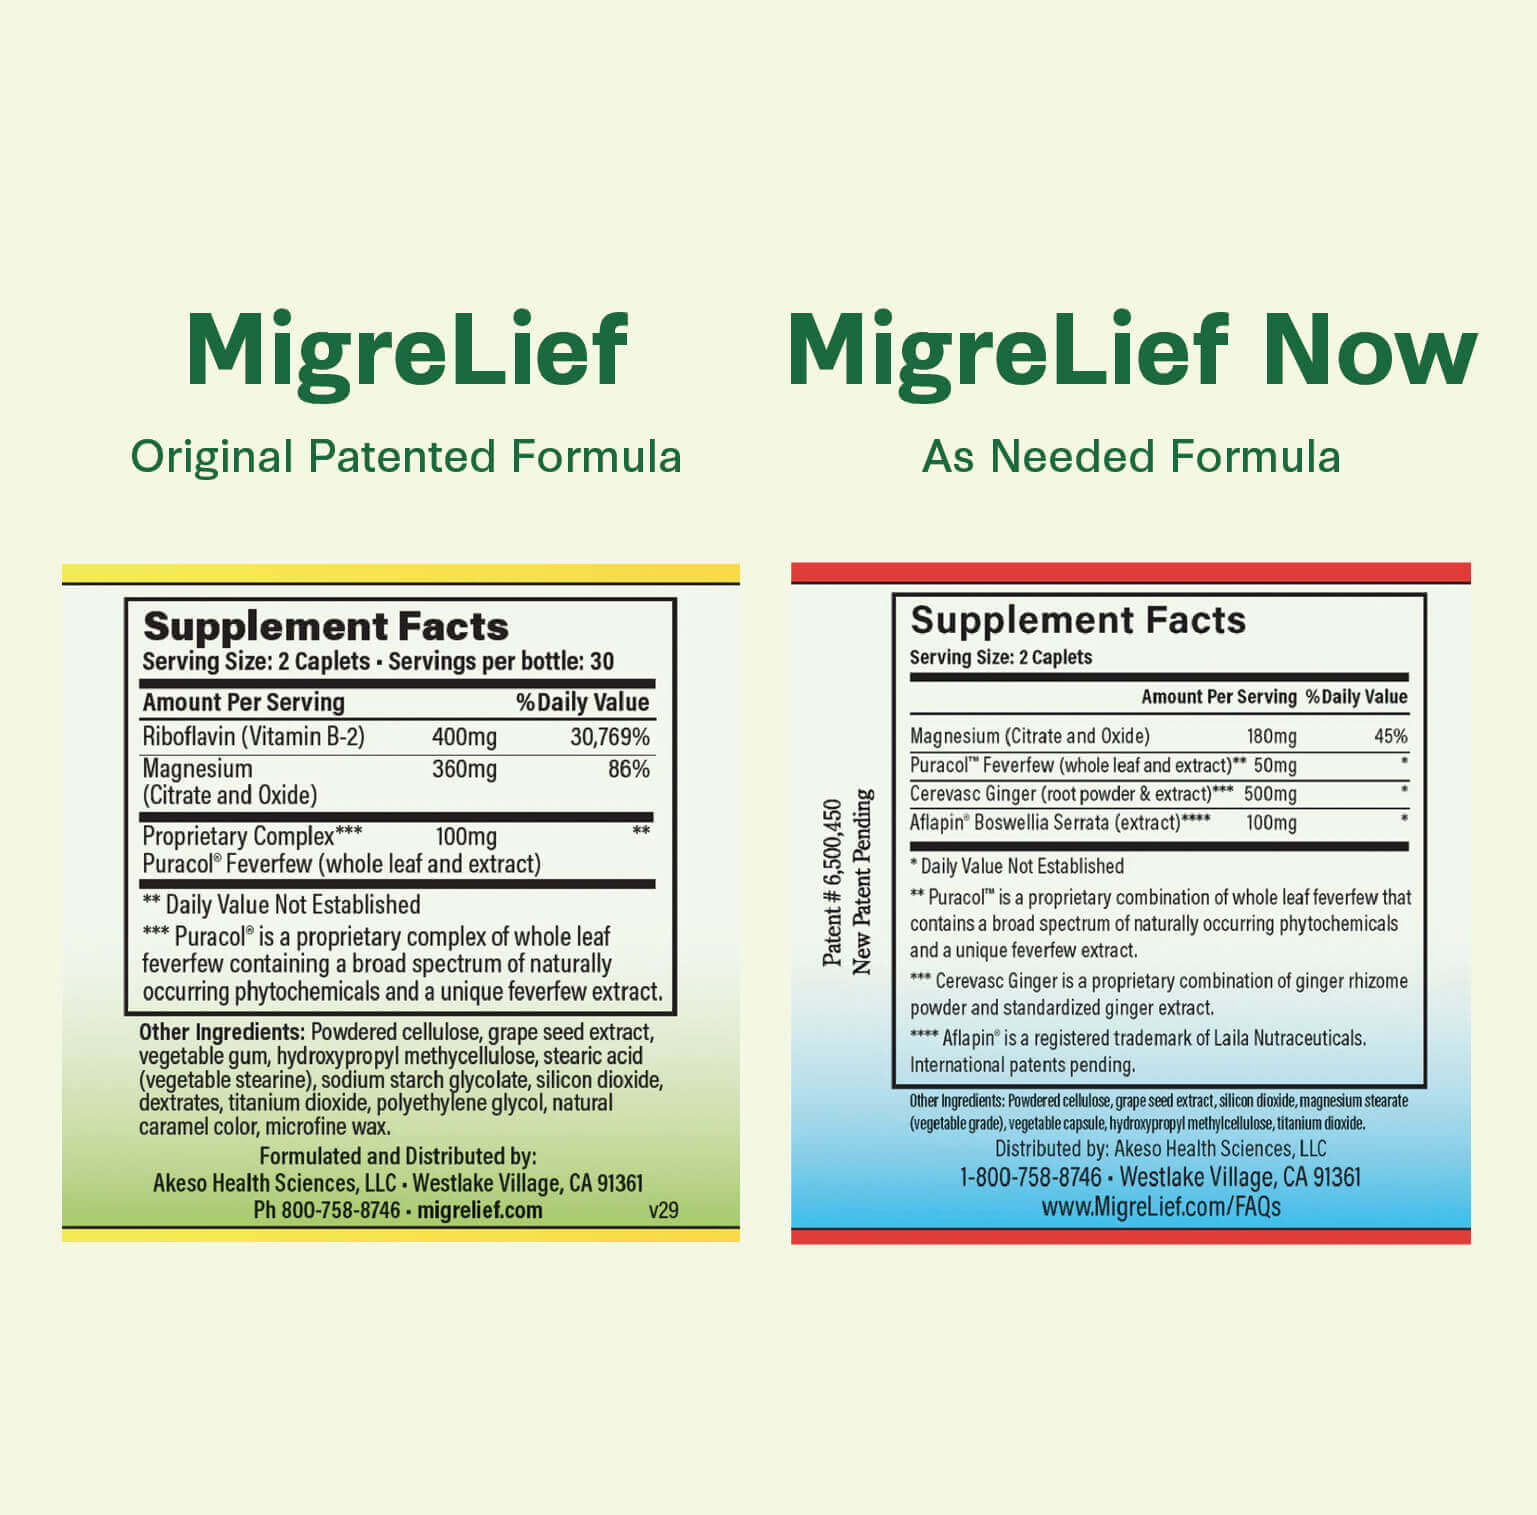 Nutritional Facts labels for MigreLief Original Formula and MigreLief-Now.